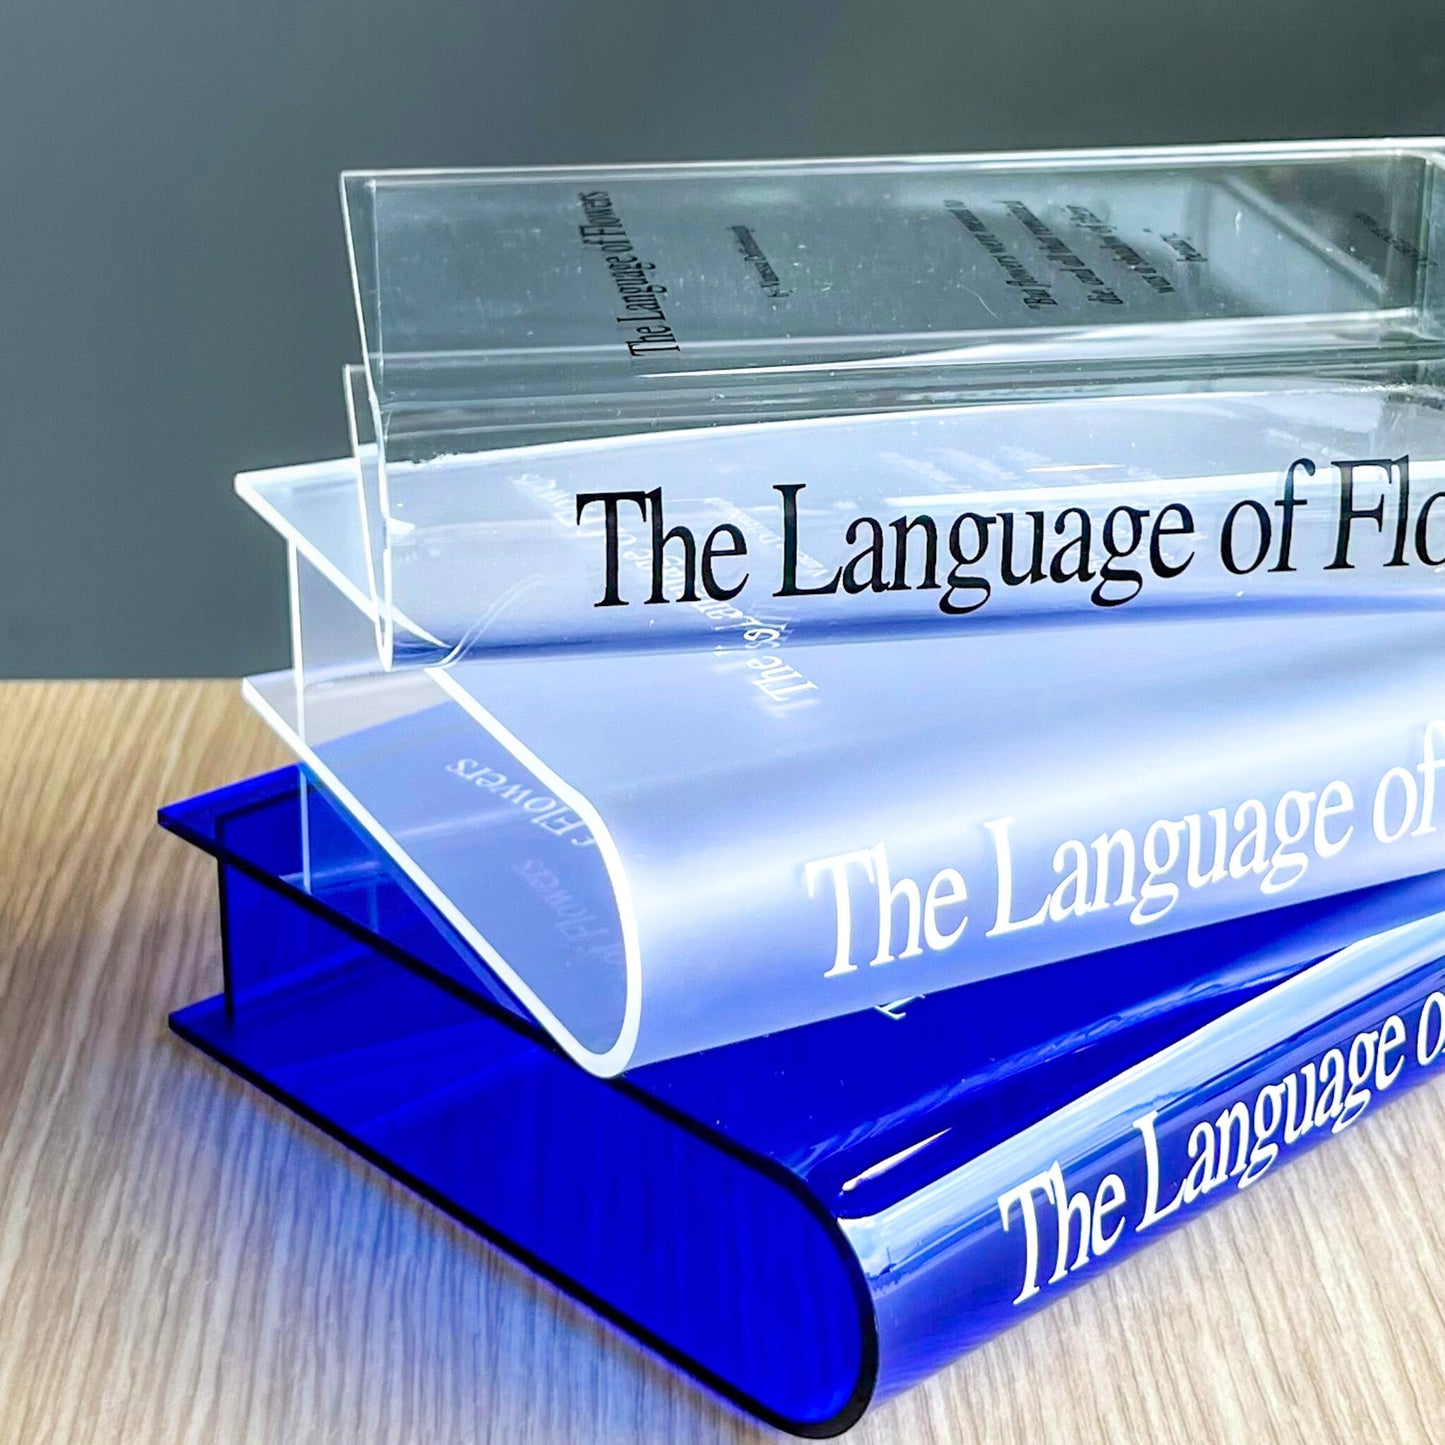 The Language of Flowers Acrylic Book Vase Unique Home Decor for Book and Flower Lovers for Events, Birthdays, and Housewarmings